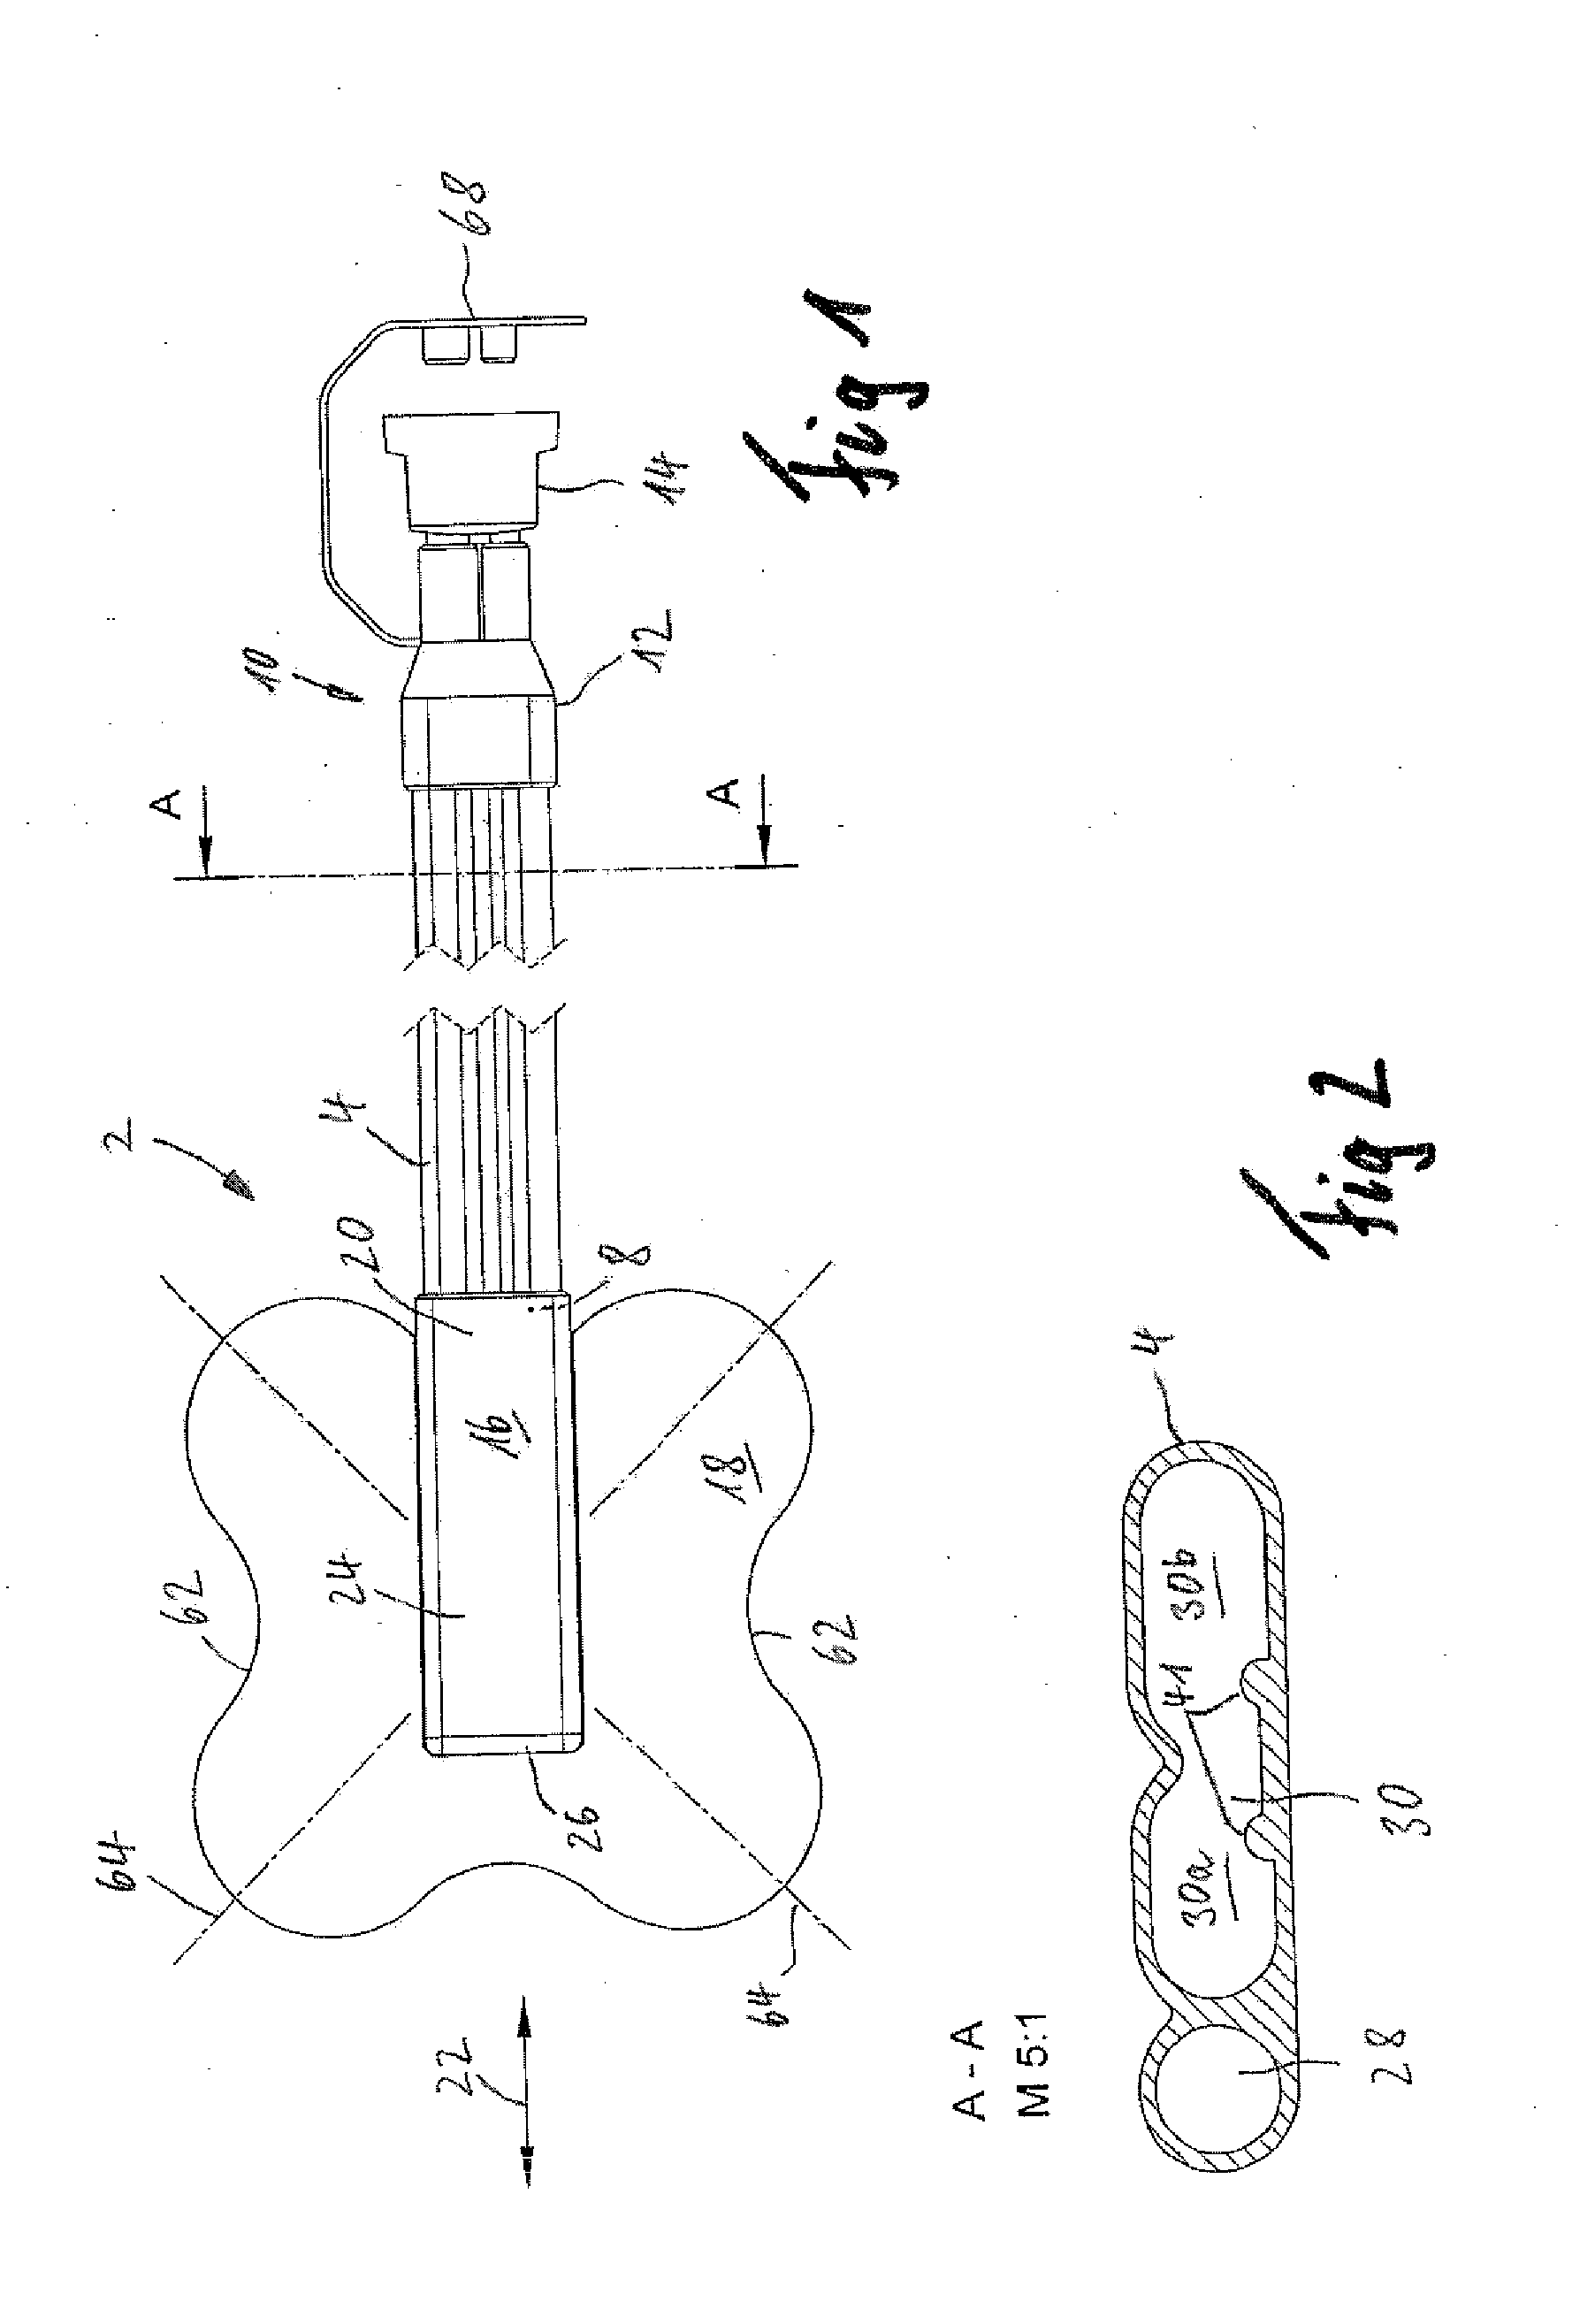 Connection device for use in the negative pressure treatment of wounds